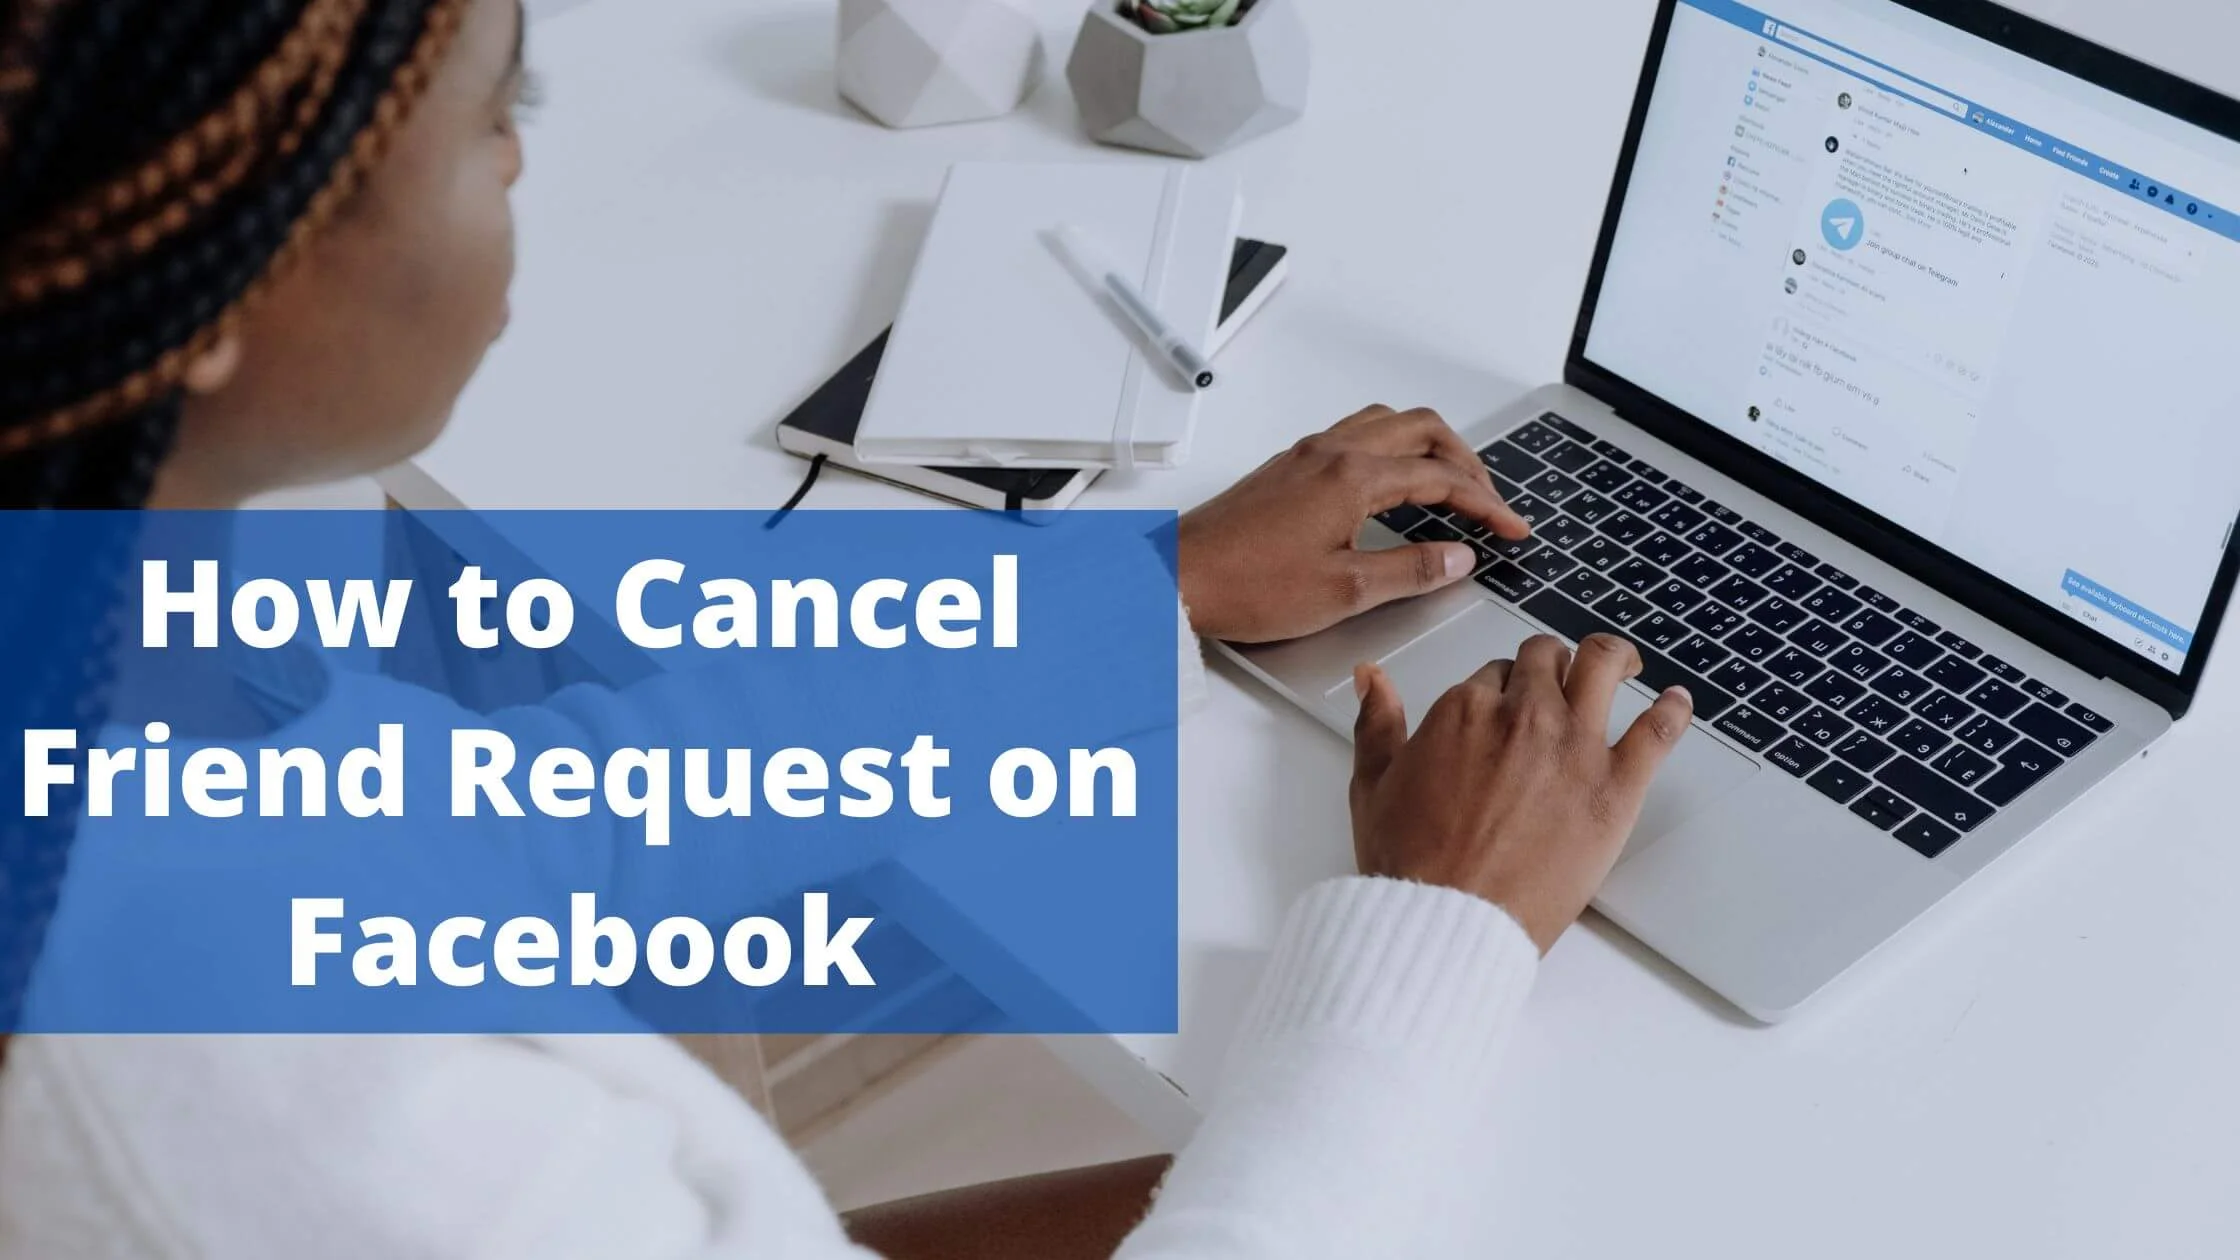 Cancel Friend Request on Facebook